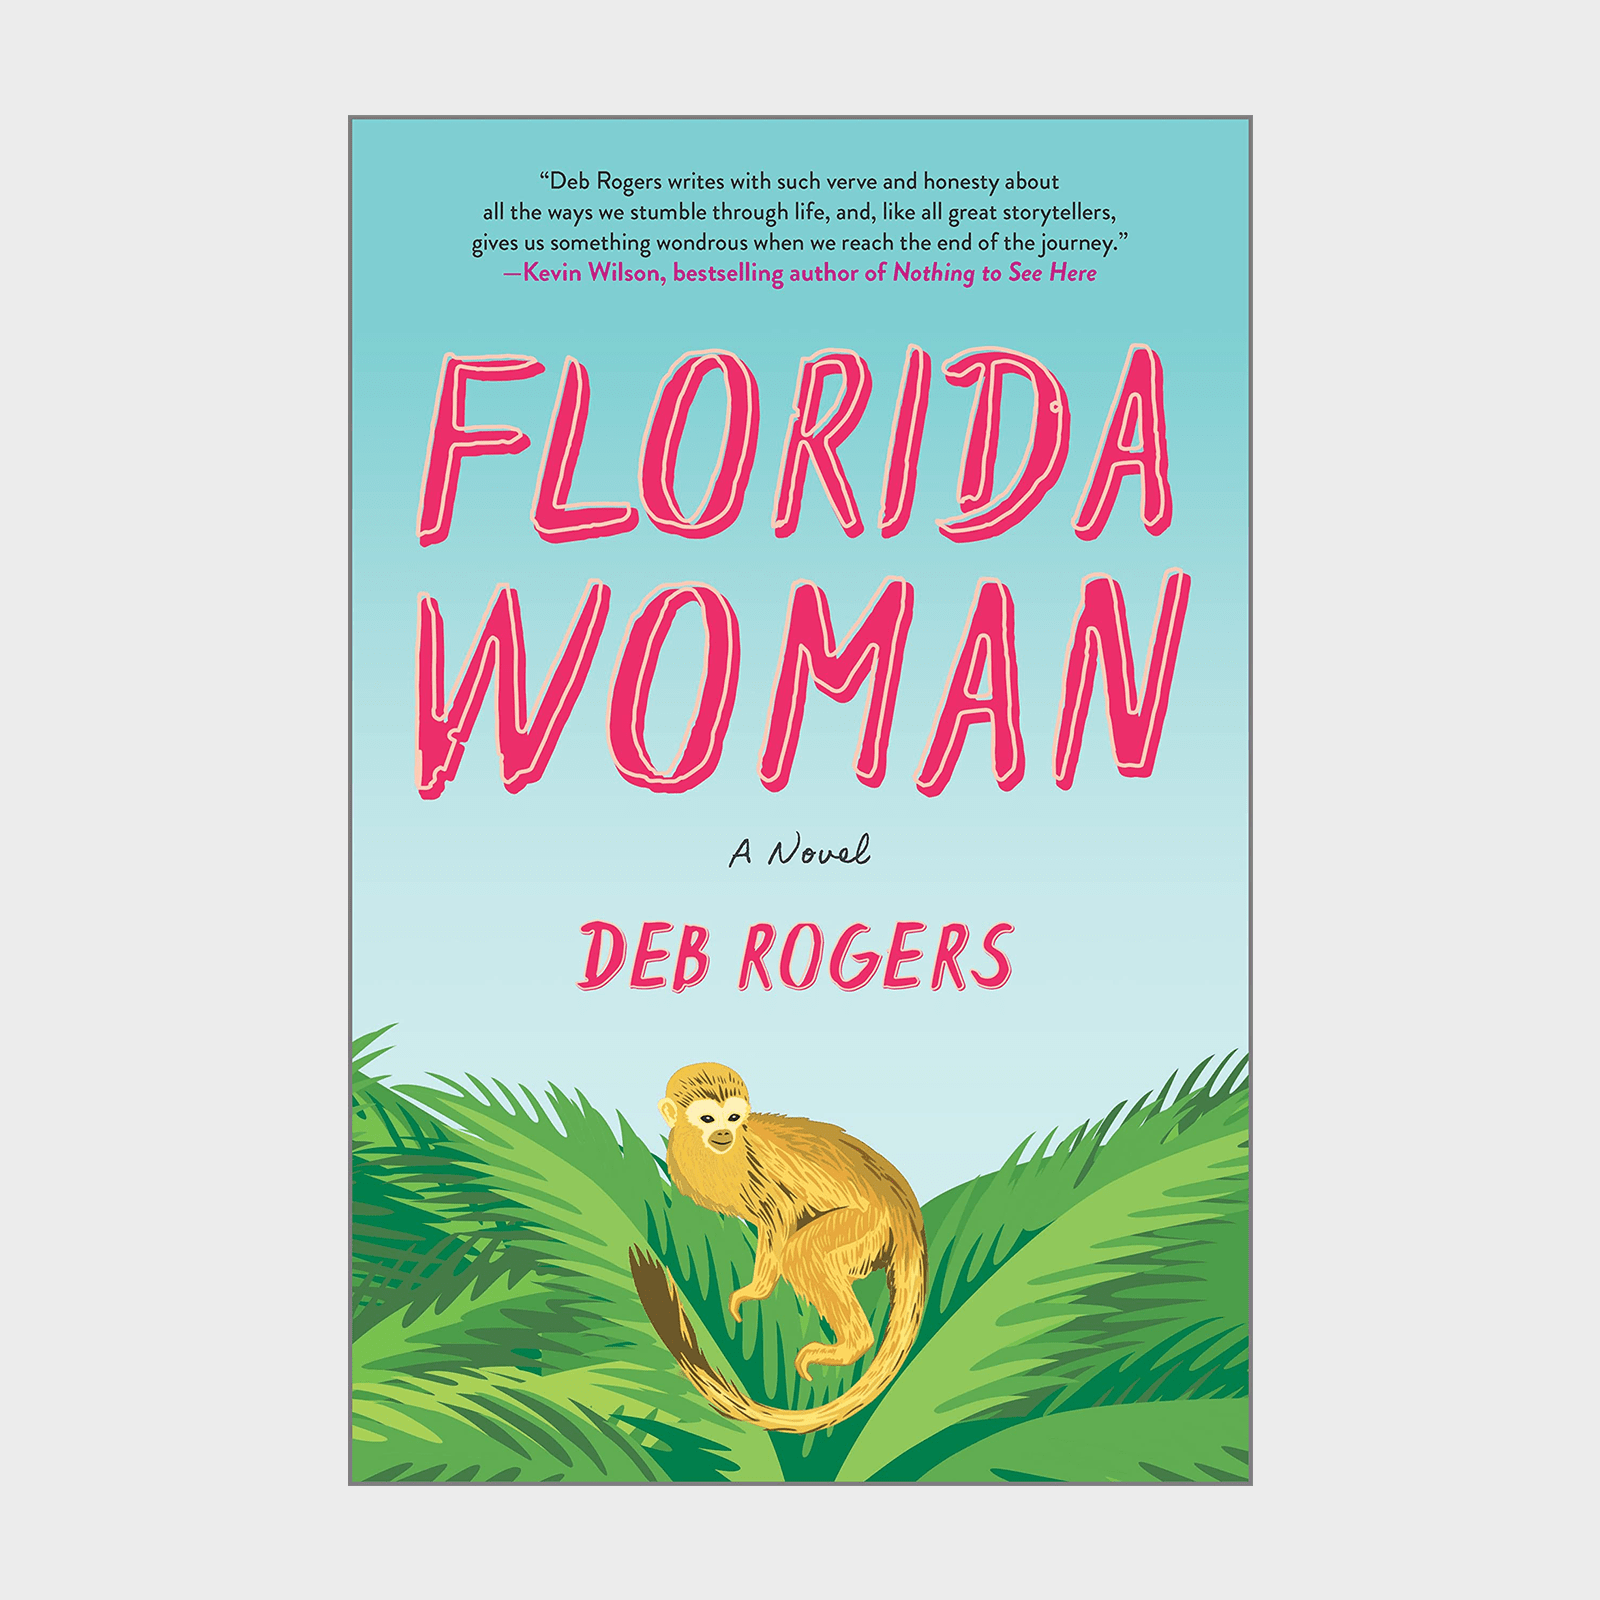 <p><strong>Release date:</strong> July 5, 2022</p> <p>Deb Rogers's <a href="https://www.amazon.com/Florida-Woman-Novel-Deb-Rogers/dp/1335426892/" rel="noopener noreferrer">darkly comic thriller</a> opens when Jamie, a lifelong Florida woman, is caught on film during one of the most embarrassing moments of her life. Relieved to get community service rather than jail time for her crime, Jamie heads off to Atlas, a monkey sanctuary. But all is not as it seems. She is soon consumed by the sinister world of Atlas, complete with sacrifices and cult-like adoration for the organization's leaders. This is a suspenseful novel for readers seeking a good LGBTQ+ contemporary mystery.</p> <p class="listicle-page__cta-button-shop"><a class="shop-btn" href="https://www.amazon.com/Florida-Woman-Novel-Deb-Rogers-ebook/dp/B09CMQ1SHR">Shop Now</a></p>